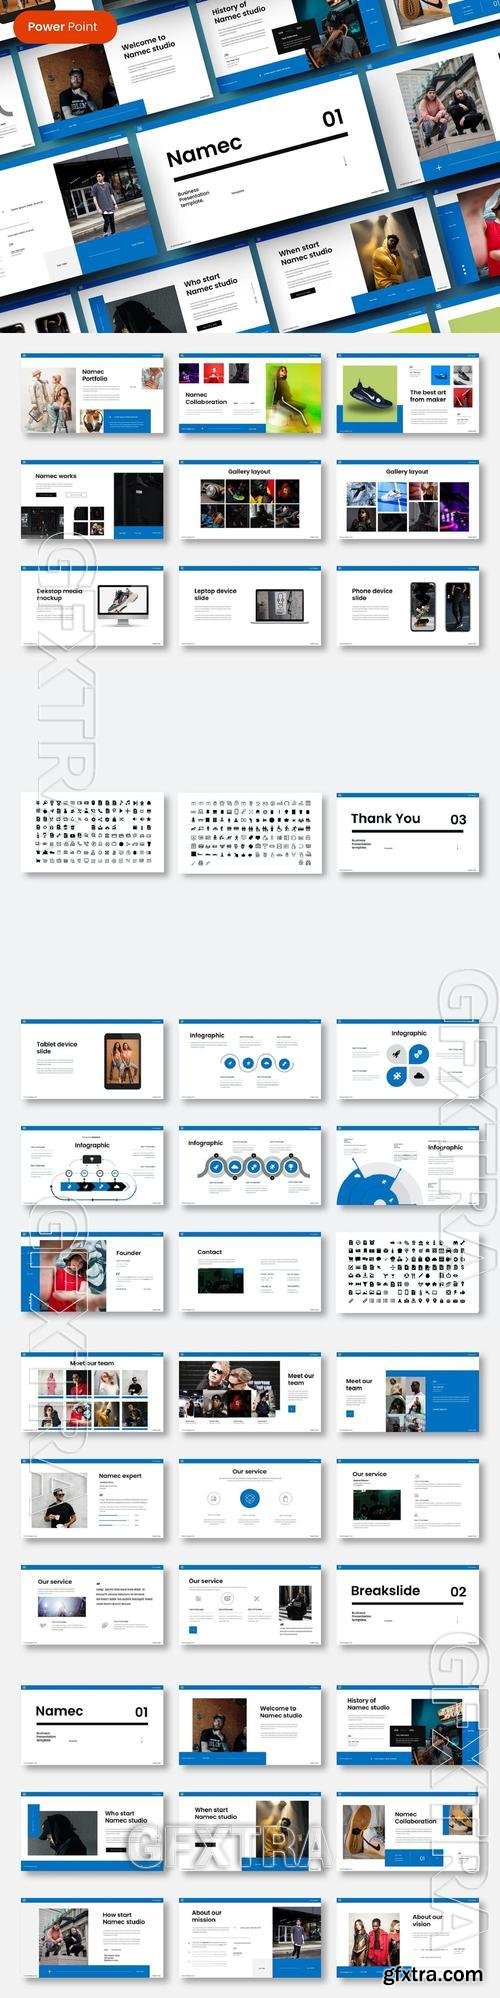 Namec - Business PowerPoint Template A8ZUUD8